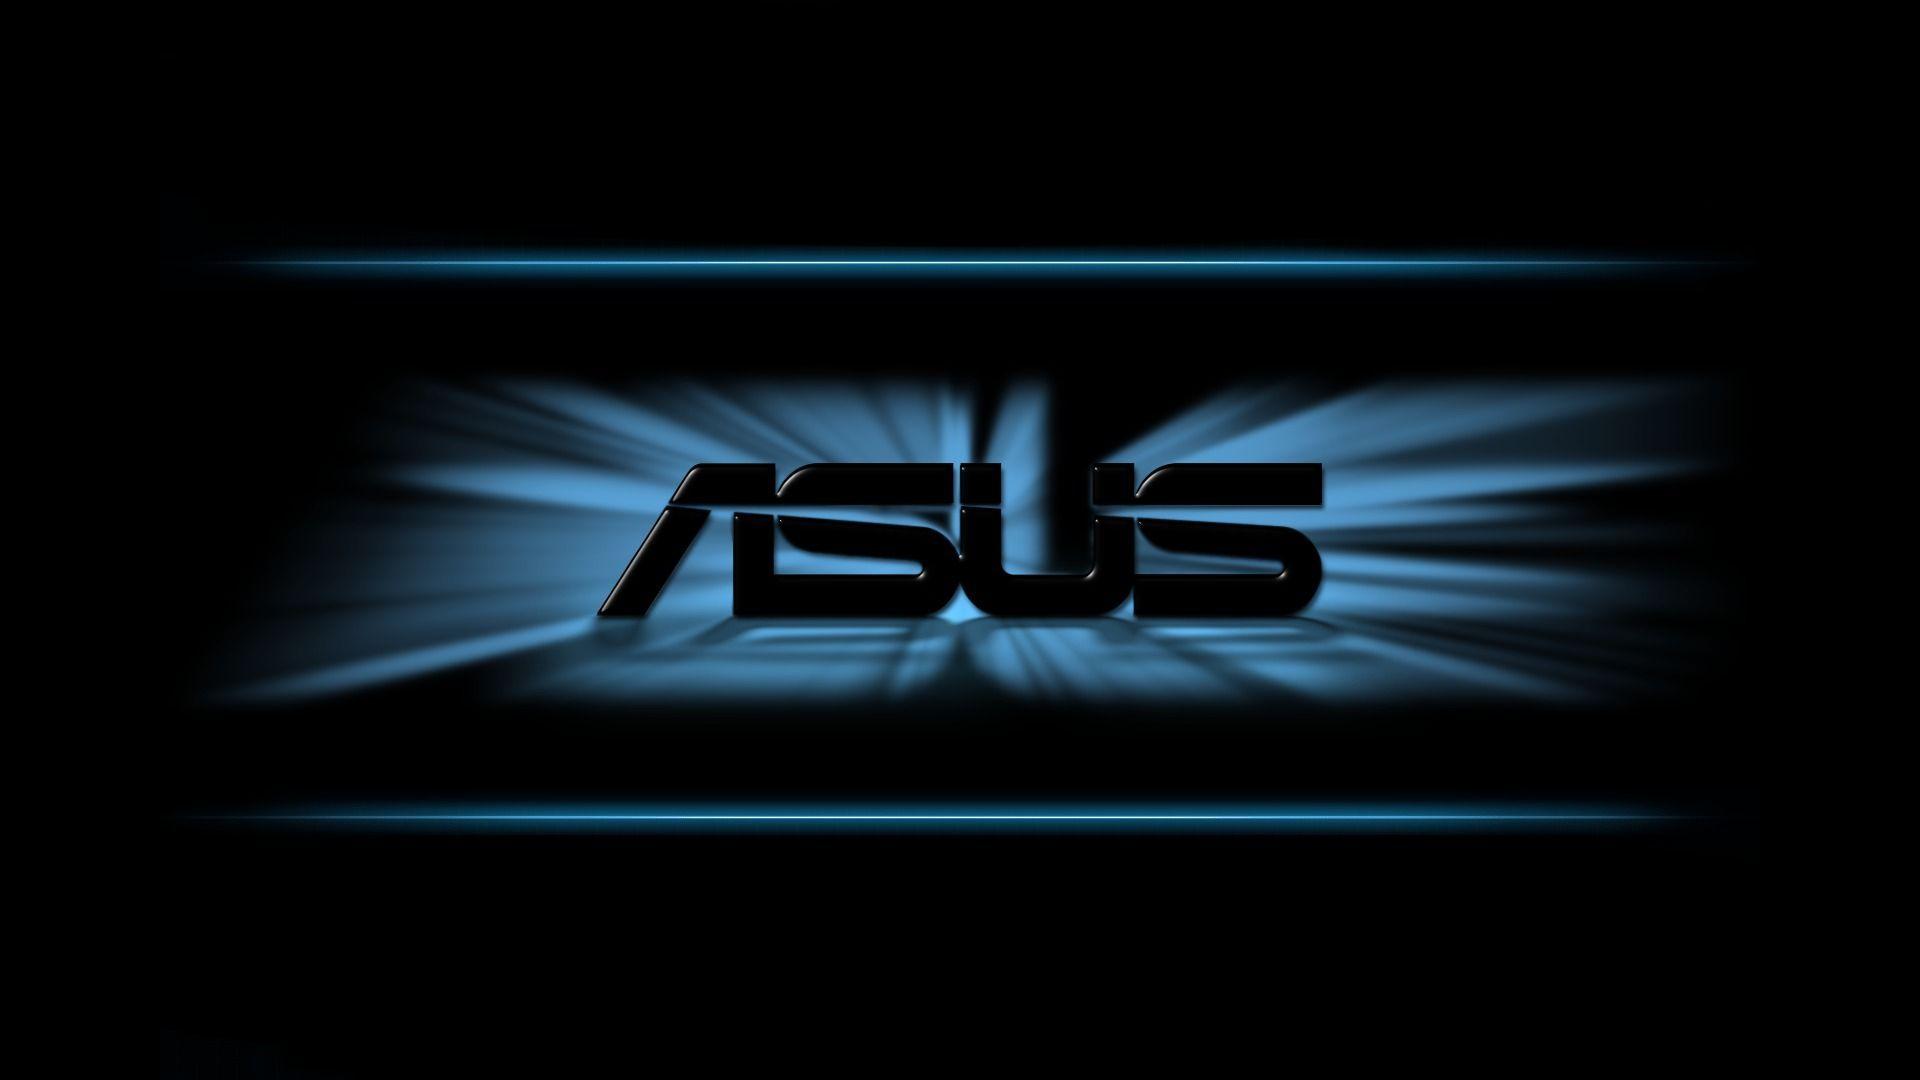 Top Asus Pc Desktop Wallpaper of the decade Learn more here 